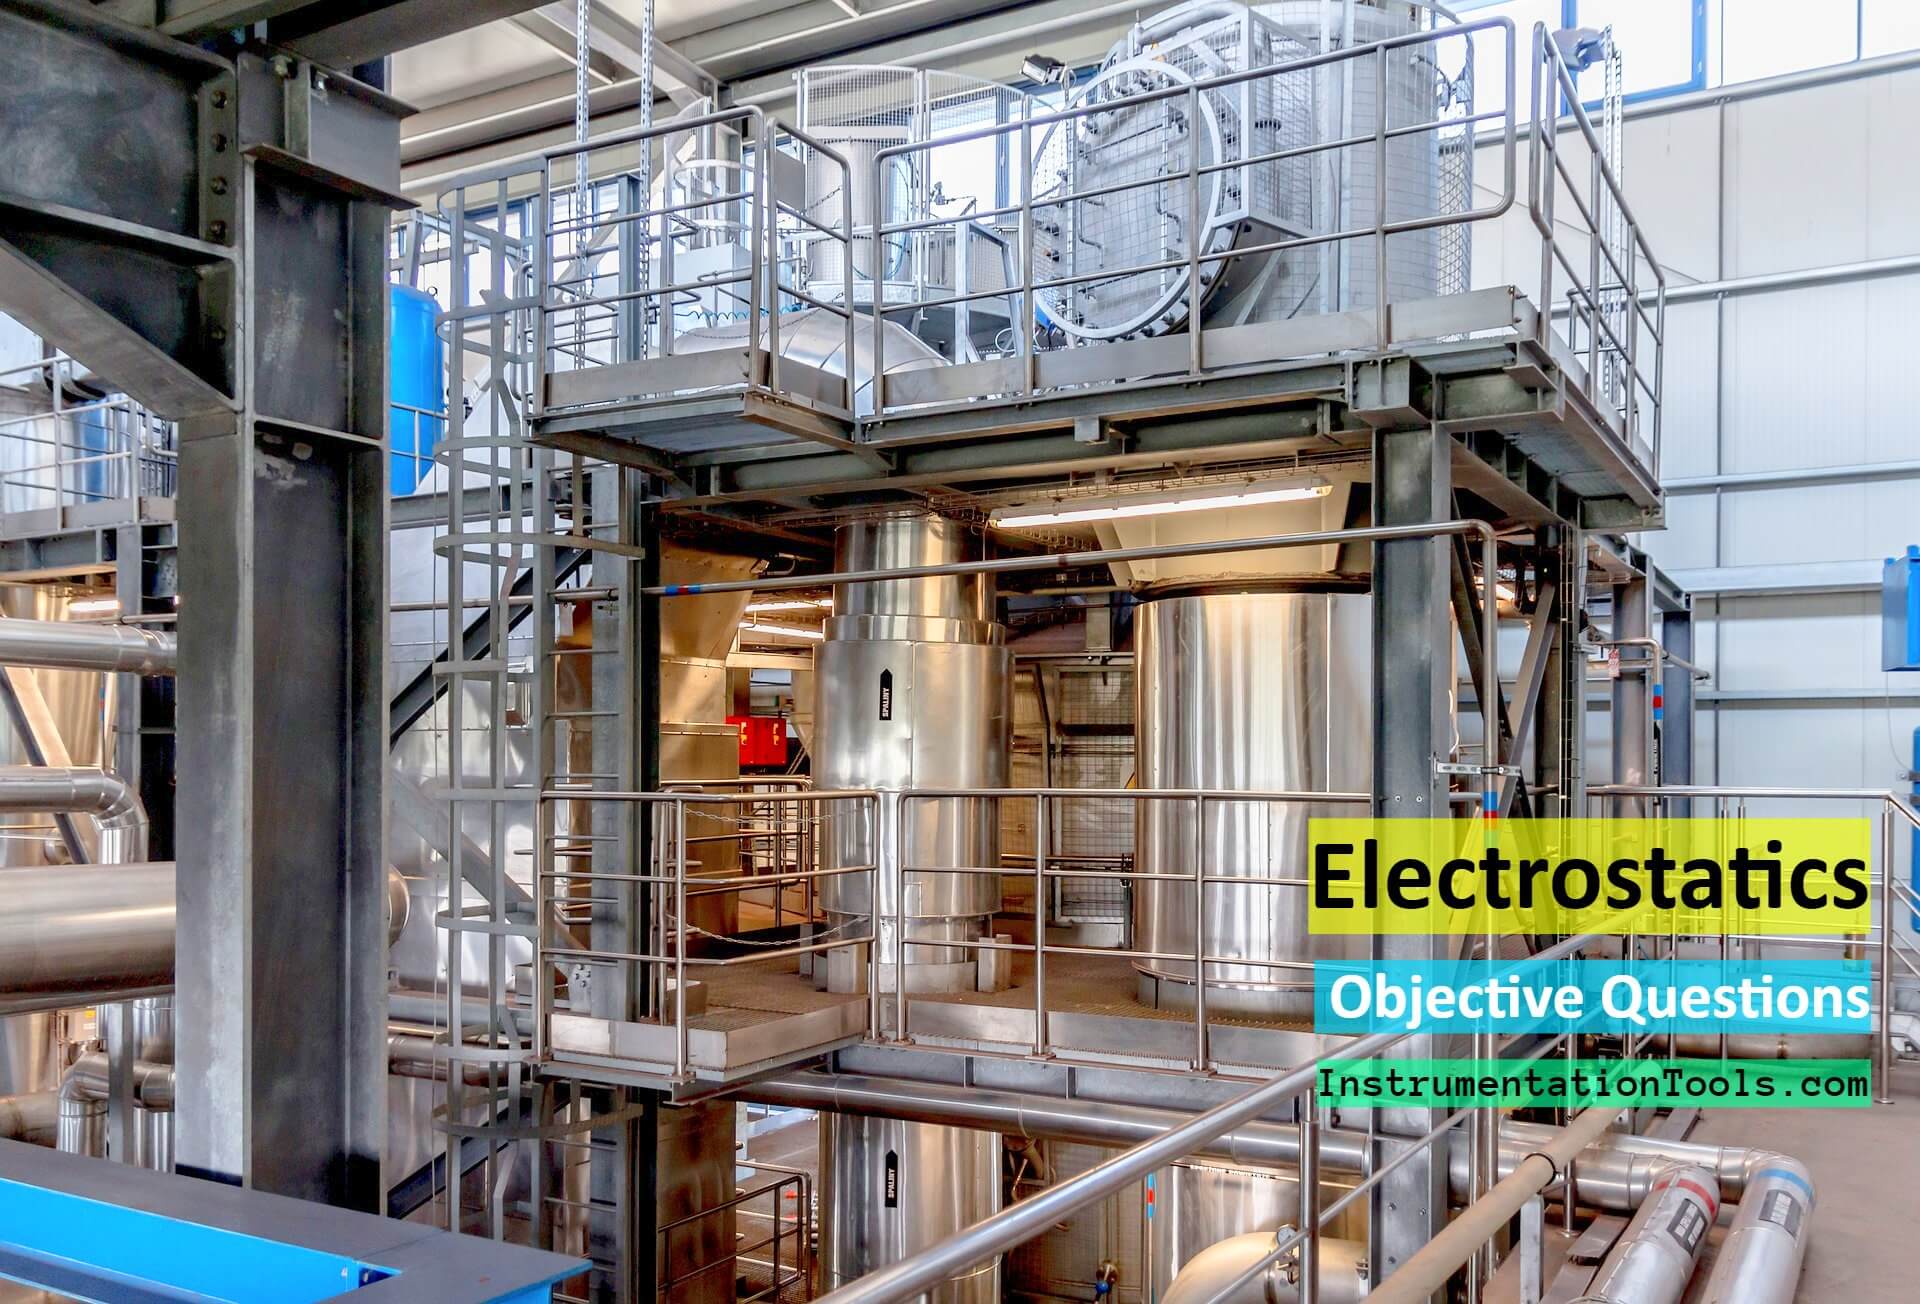 Electrostatics Objective Questions and Answers